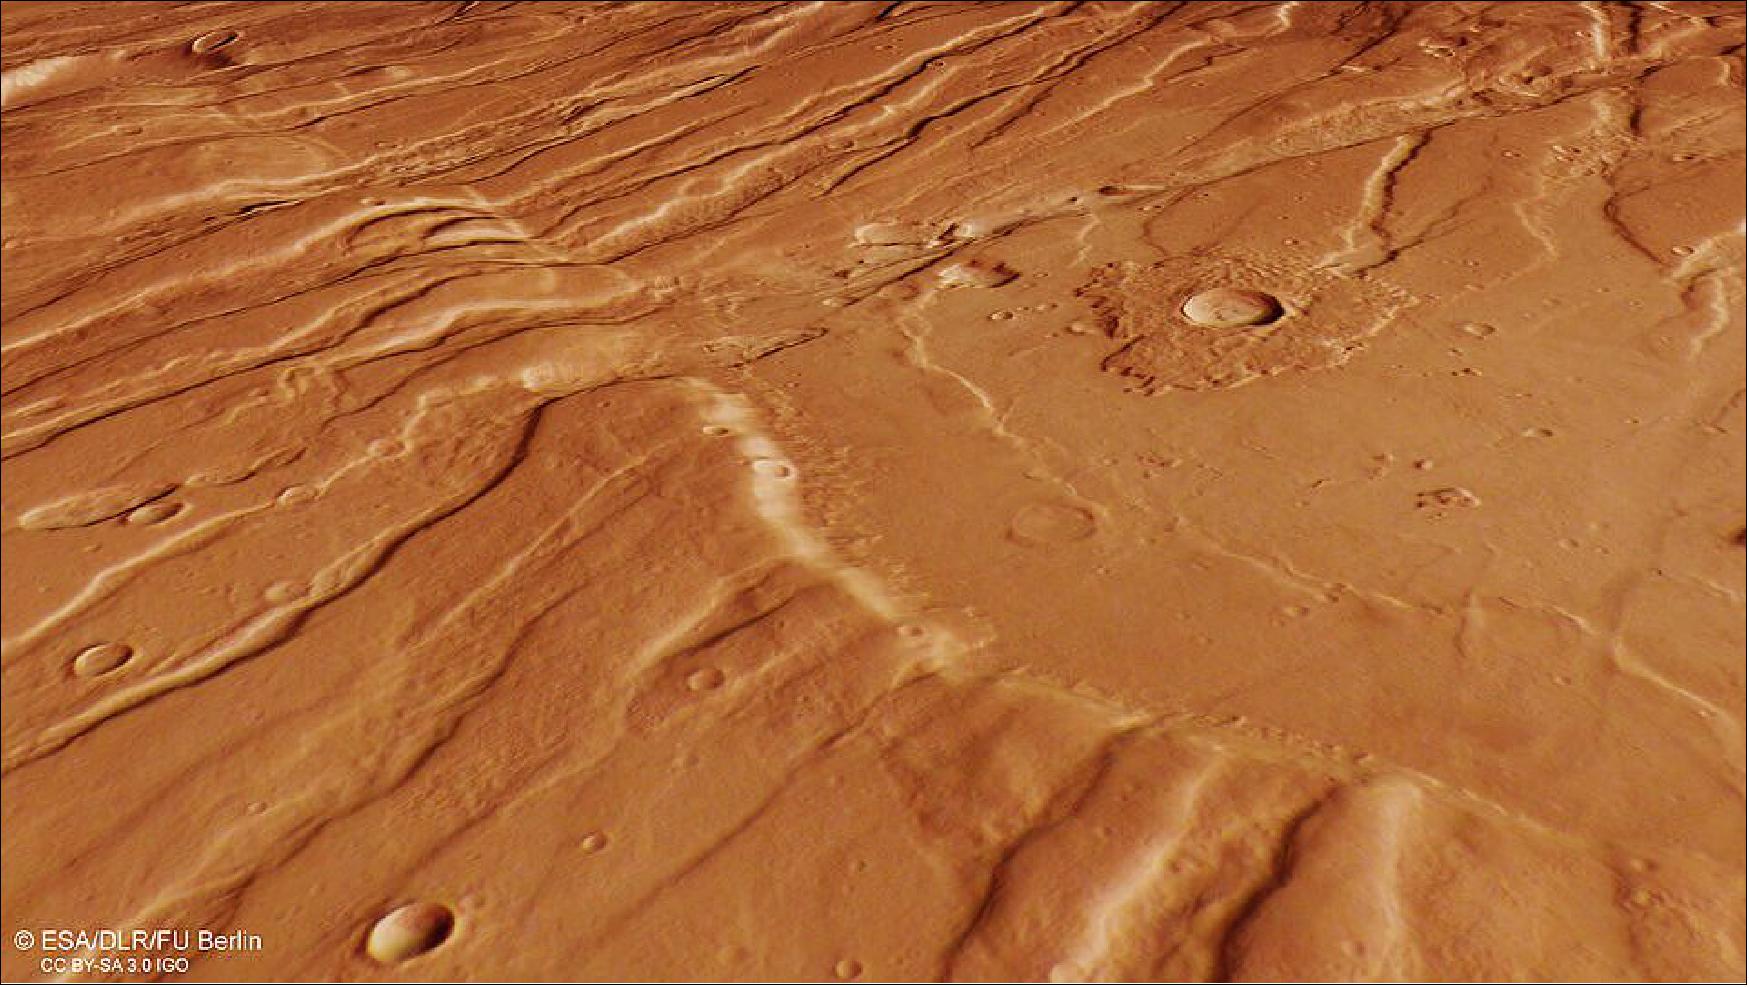 Figure 95: This image shows a part of Mars’ surface located northeast of the Tharsis volcanic province. This is a portion of Tempe Fossae – a series of tectonic faults that cuts across Tempe Terra in Mars’ northern highlands. It comprises data gathered on 30 September 2019 during orbit 19913. The ground resolution is approximately 15 m/pixel and the images are centered at about 279ºE/36ºN. This image was created using data from the nadir and color channels of the High Resolution Stereo Camera (HRSC). The nadir channel is aligned perpendicular to the surface of Mars, as if looking straight down at the surface. This HRSC stereo imaging was then used to derive a digital elevation model, upon which this oblique view is based (image credit: ESA/DLR/FU Berlin, CC BY-SA 3.0 IGO)